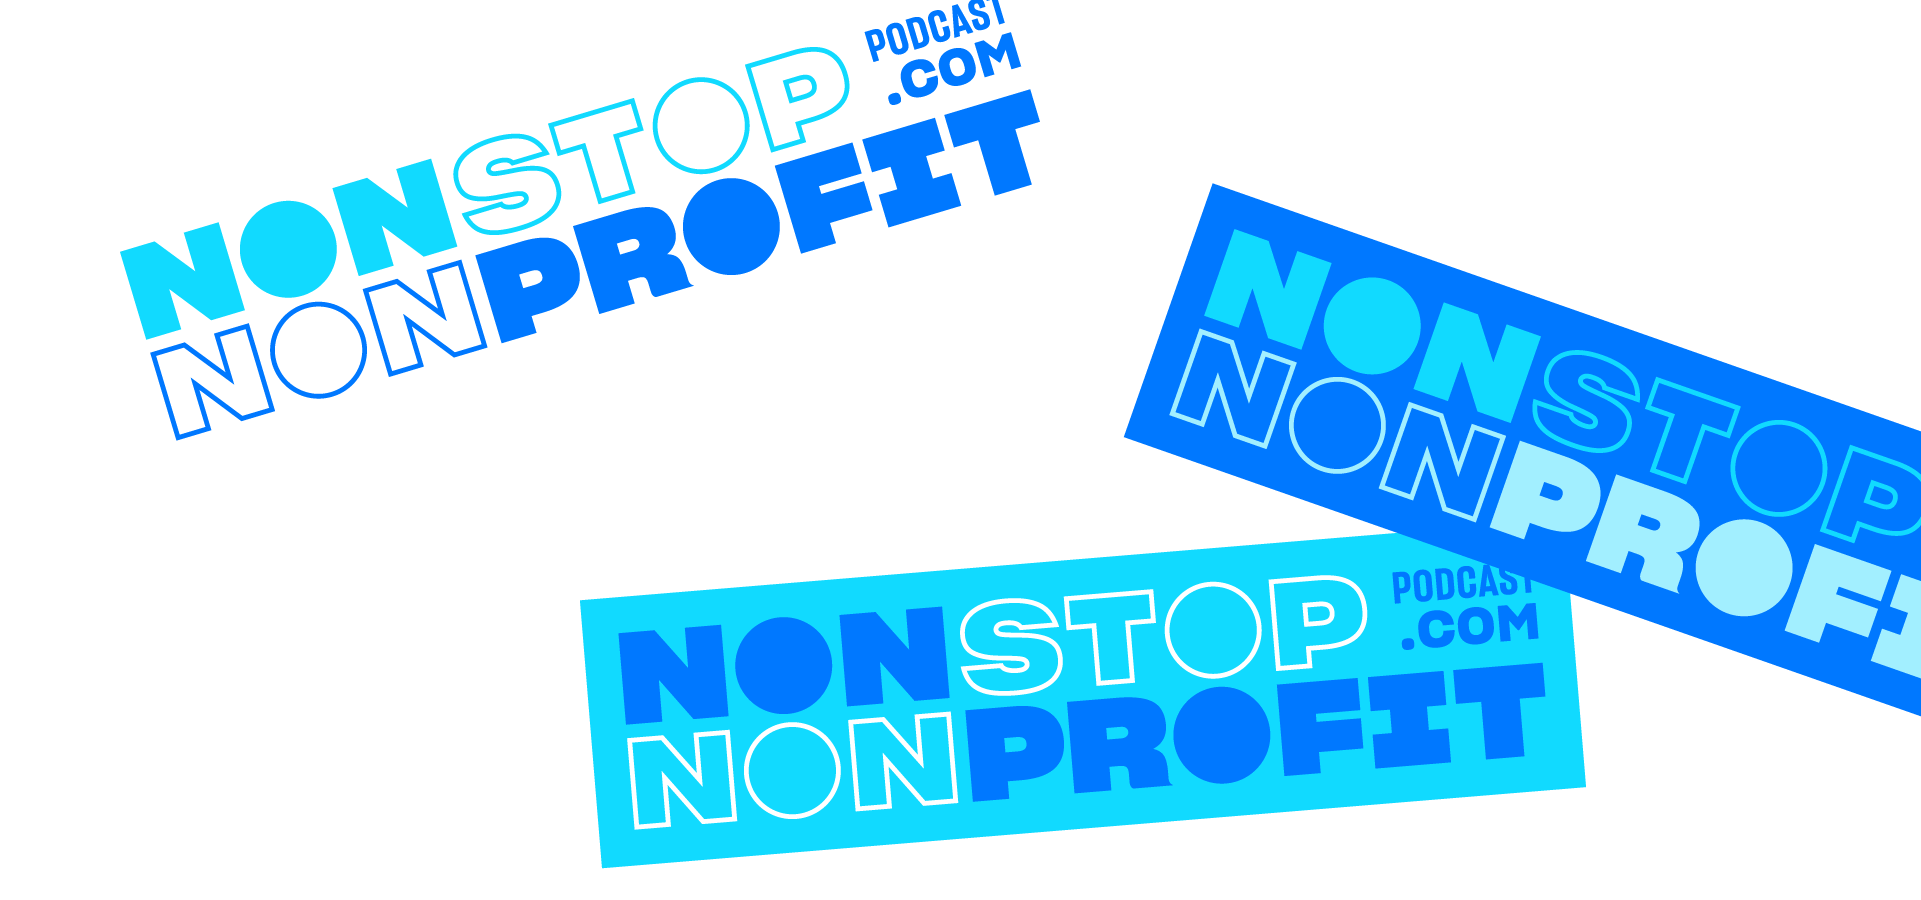 Nonstop Nonprofit Podcast Stickers